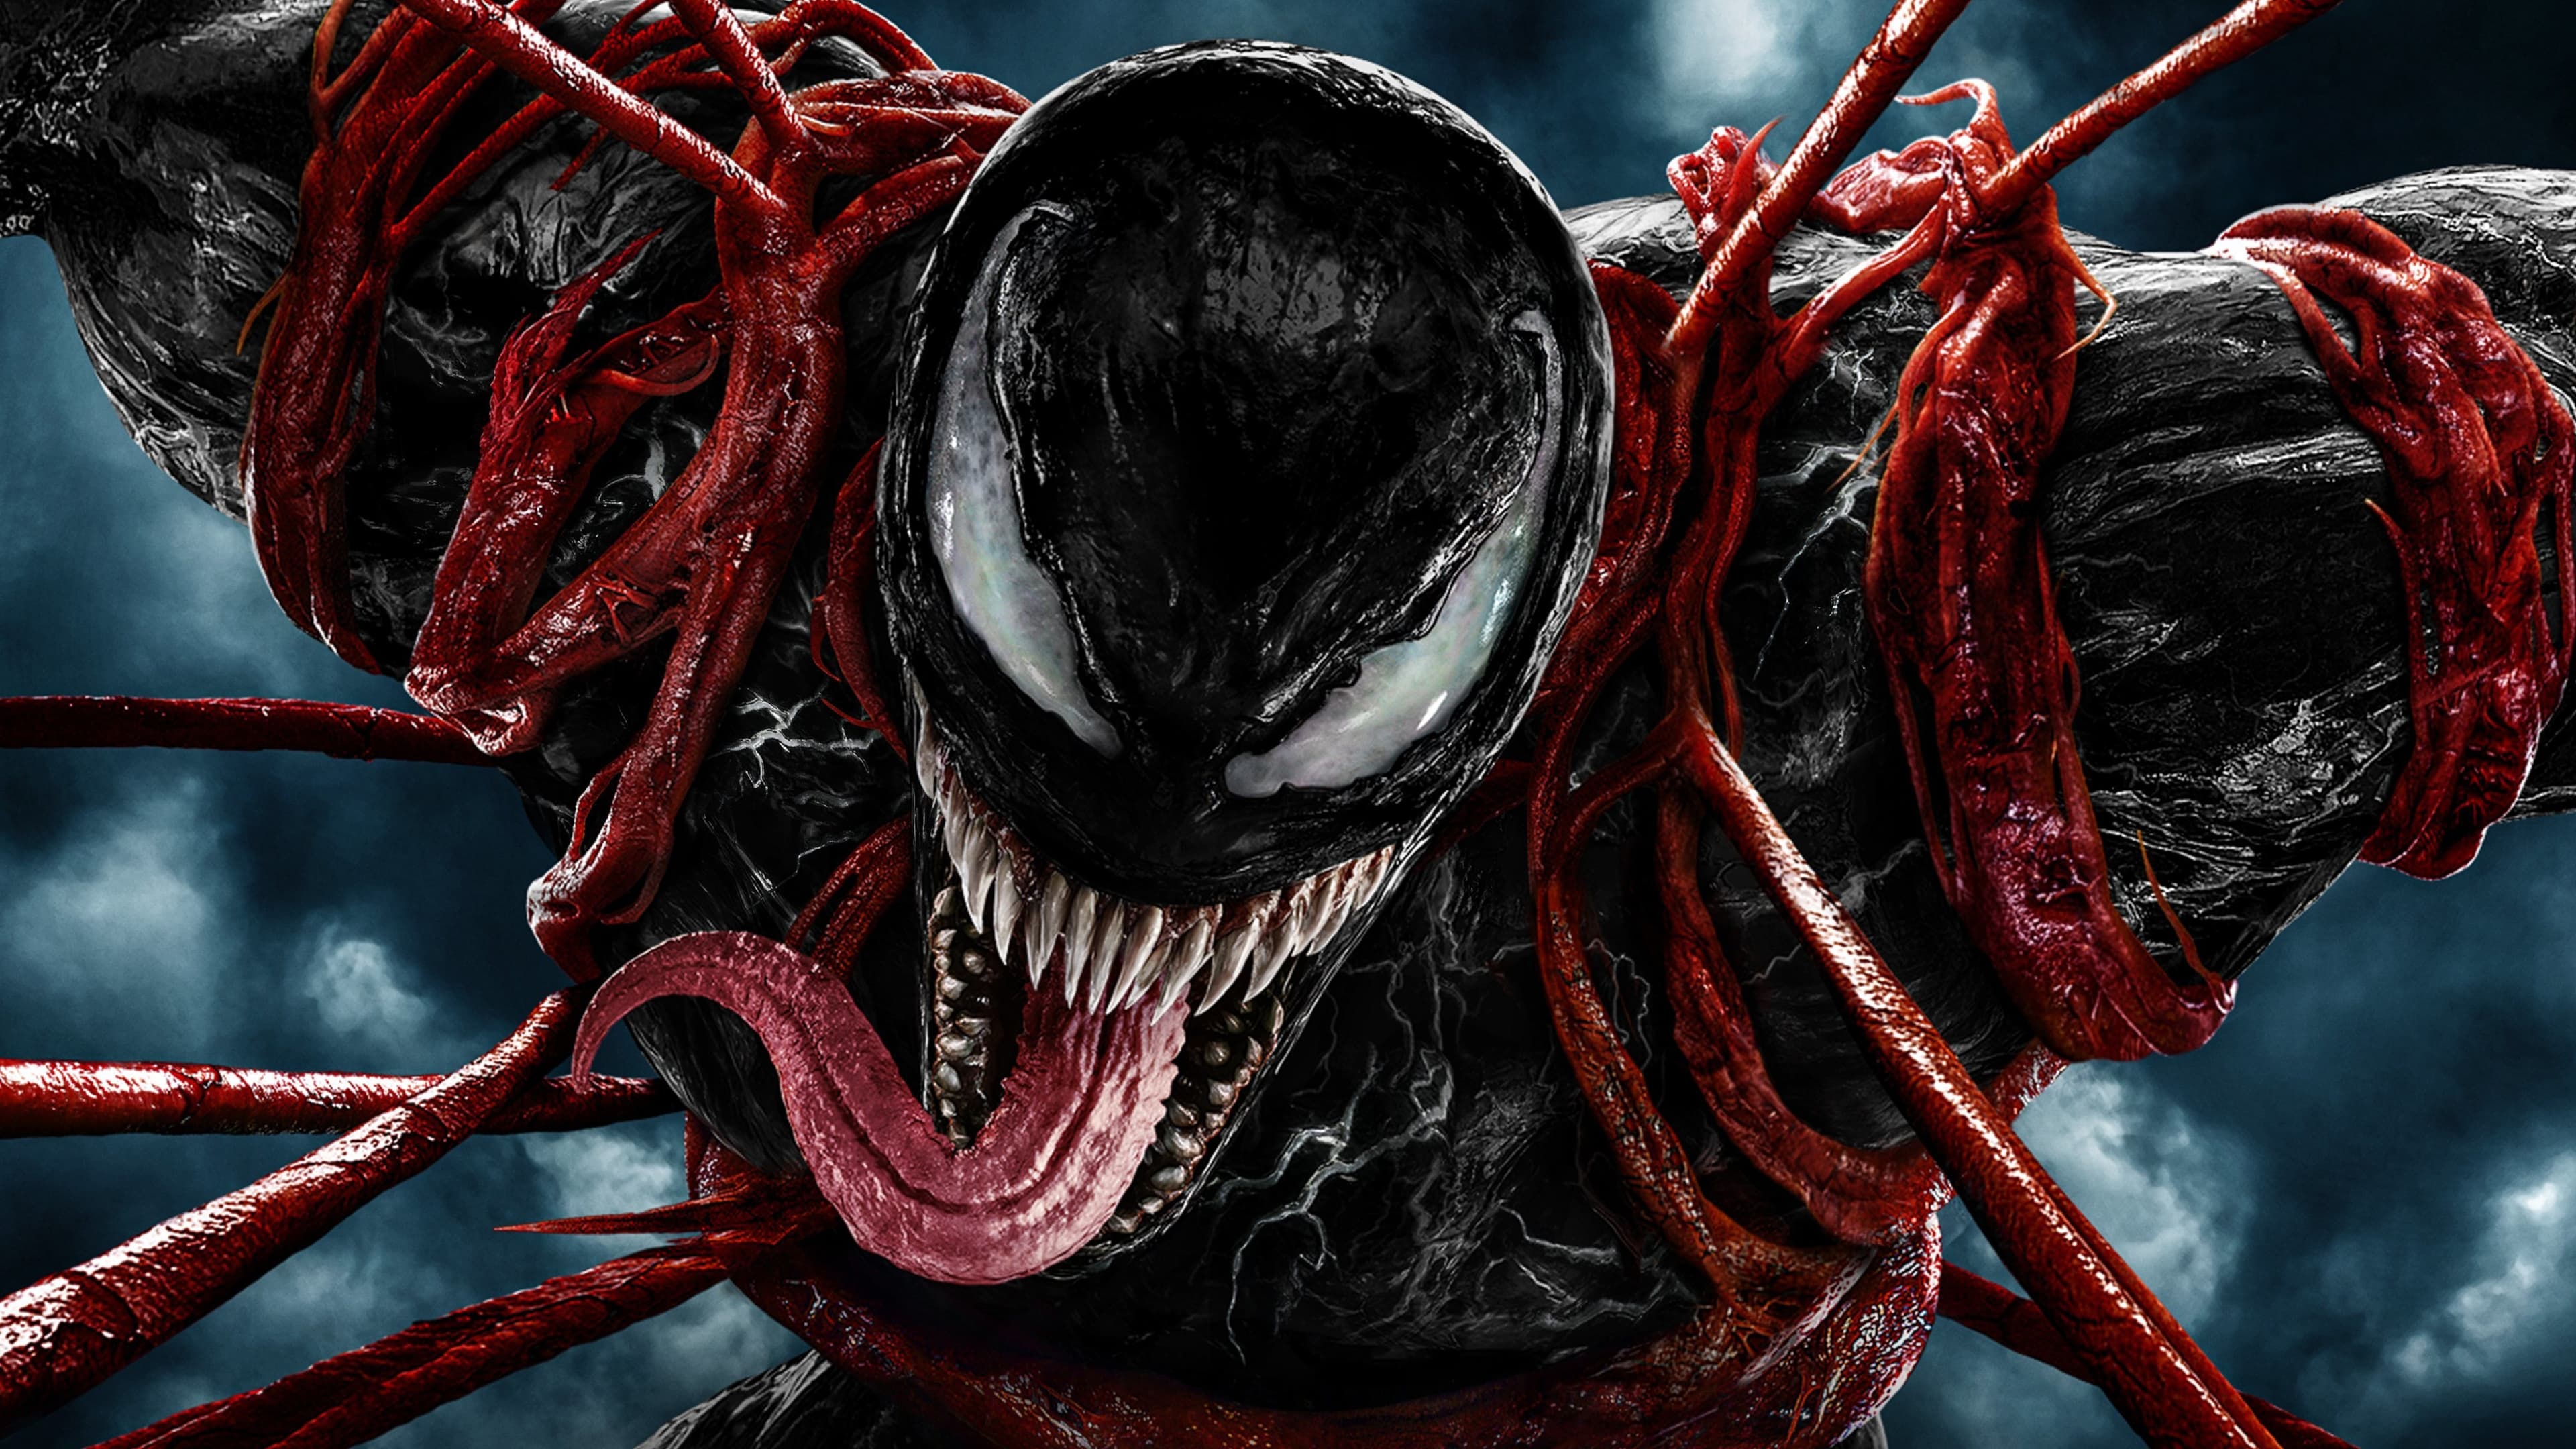 It’s progressing on ‘Venom 3’: Tom Hardy gives a promising update on the Marvel sequel